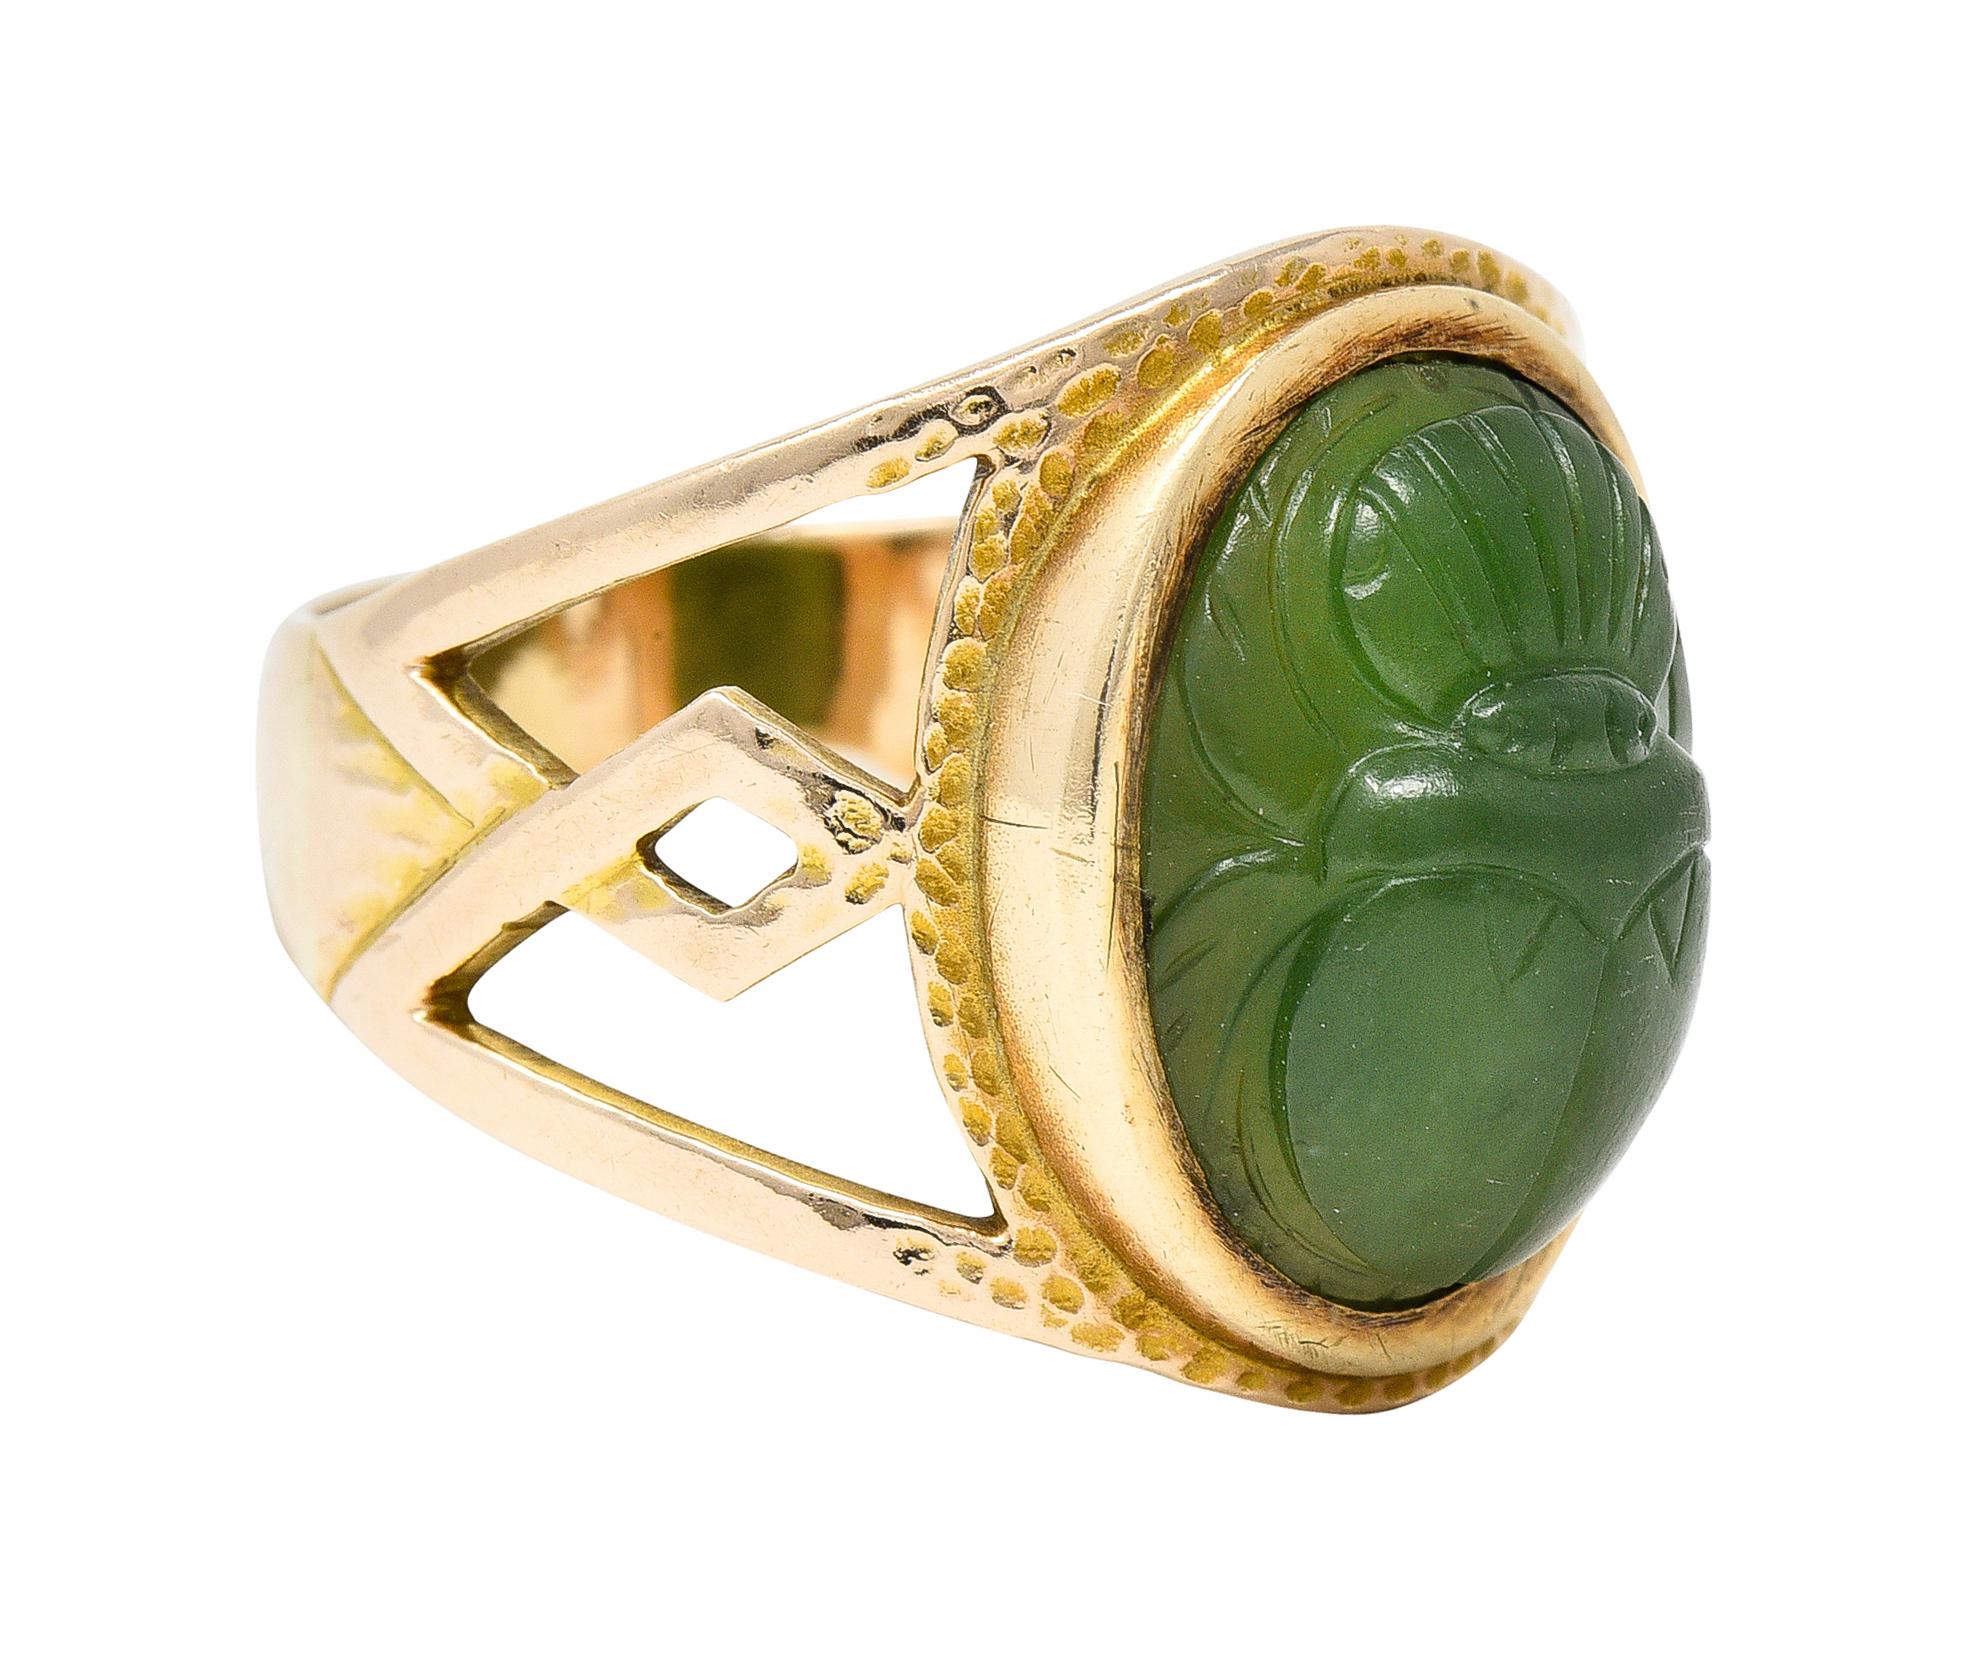 Centering an oval shaped nephrite cabochon carved to depict a scarab beetle. Measuring 13.5 x 10.5 mm - translucent medium to dark green. Bezel set with a hammer texture surround. Flanked by pierced 'W' motif shoulders. Tested as 14 karat gold.